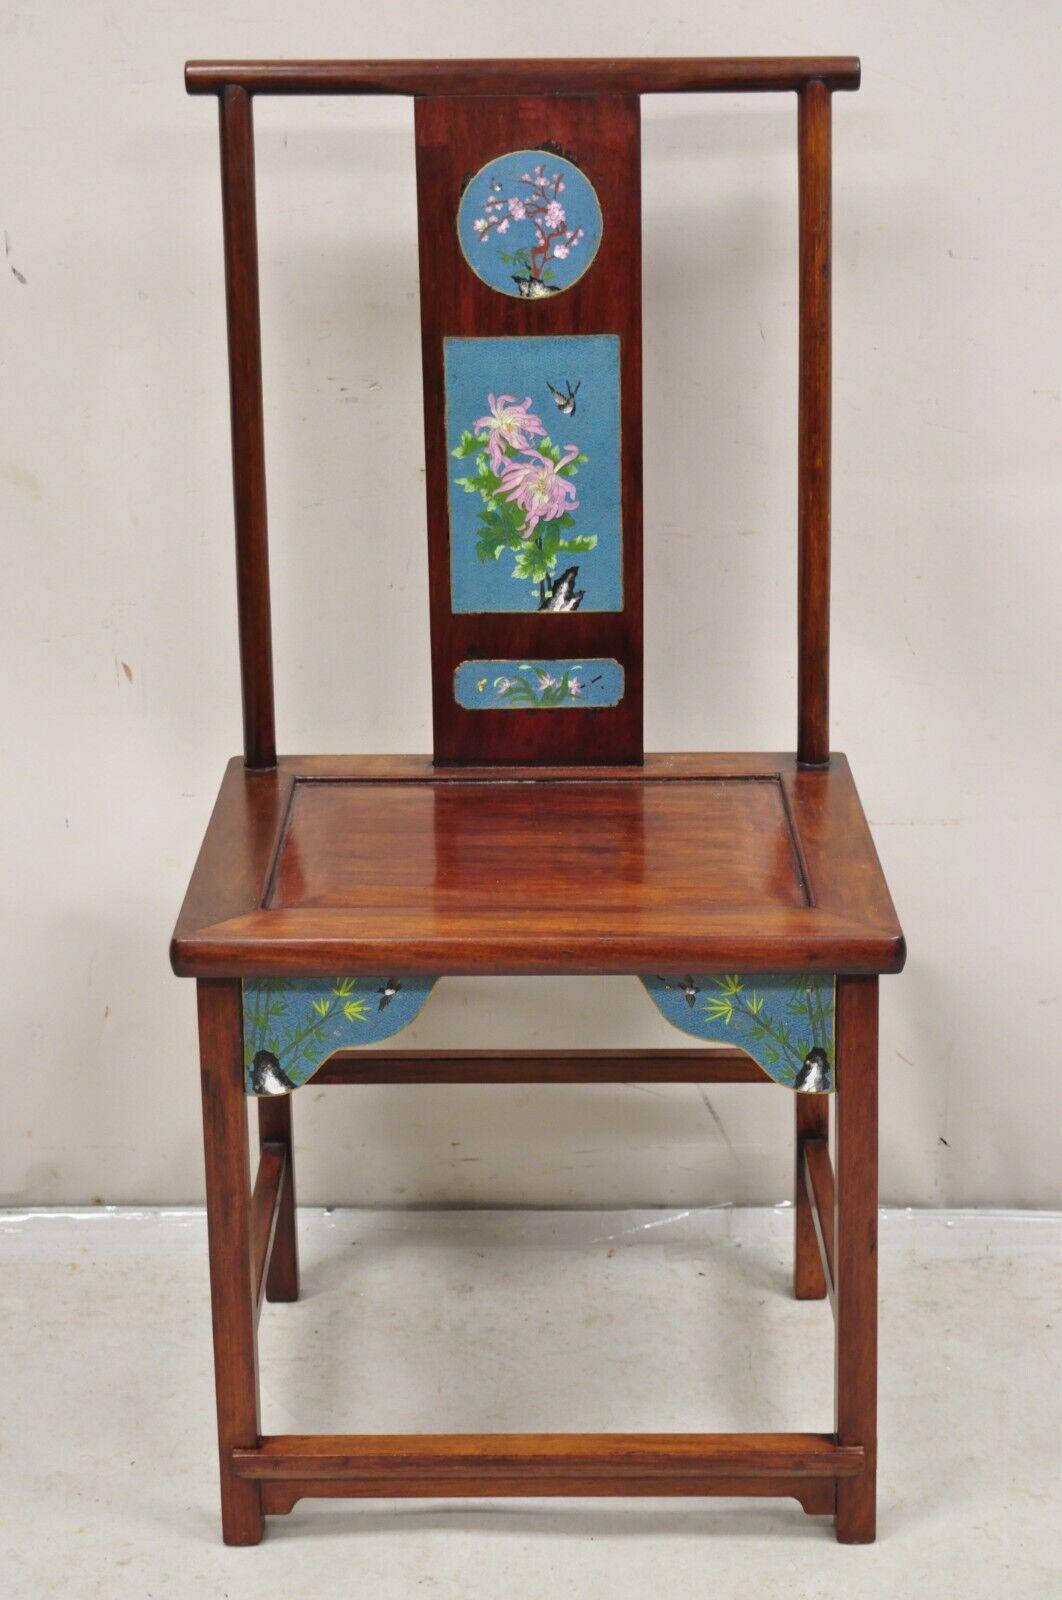 Vintage Chinese Hardwood Blue Cloisonné Enamel High Back Oriental Side Chair. Circa Mid to Late 20th Century. Measurements: 42.5